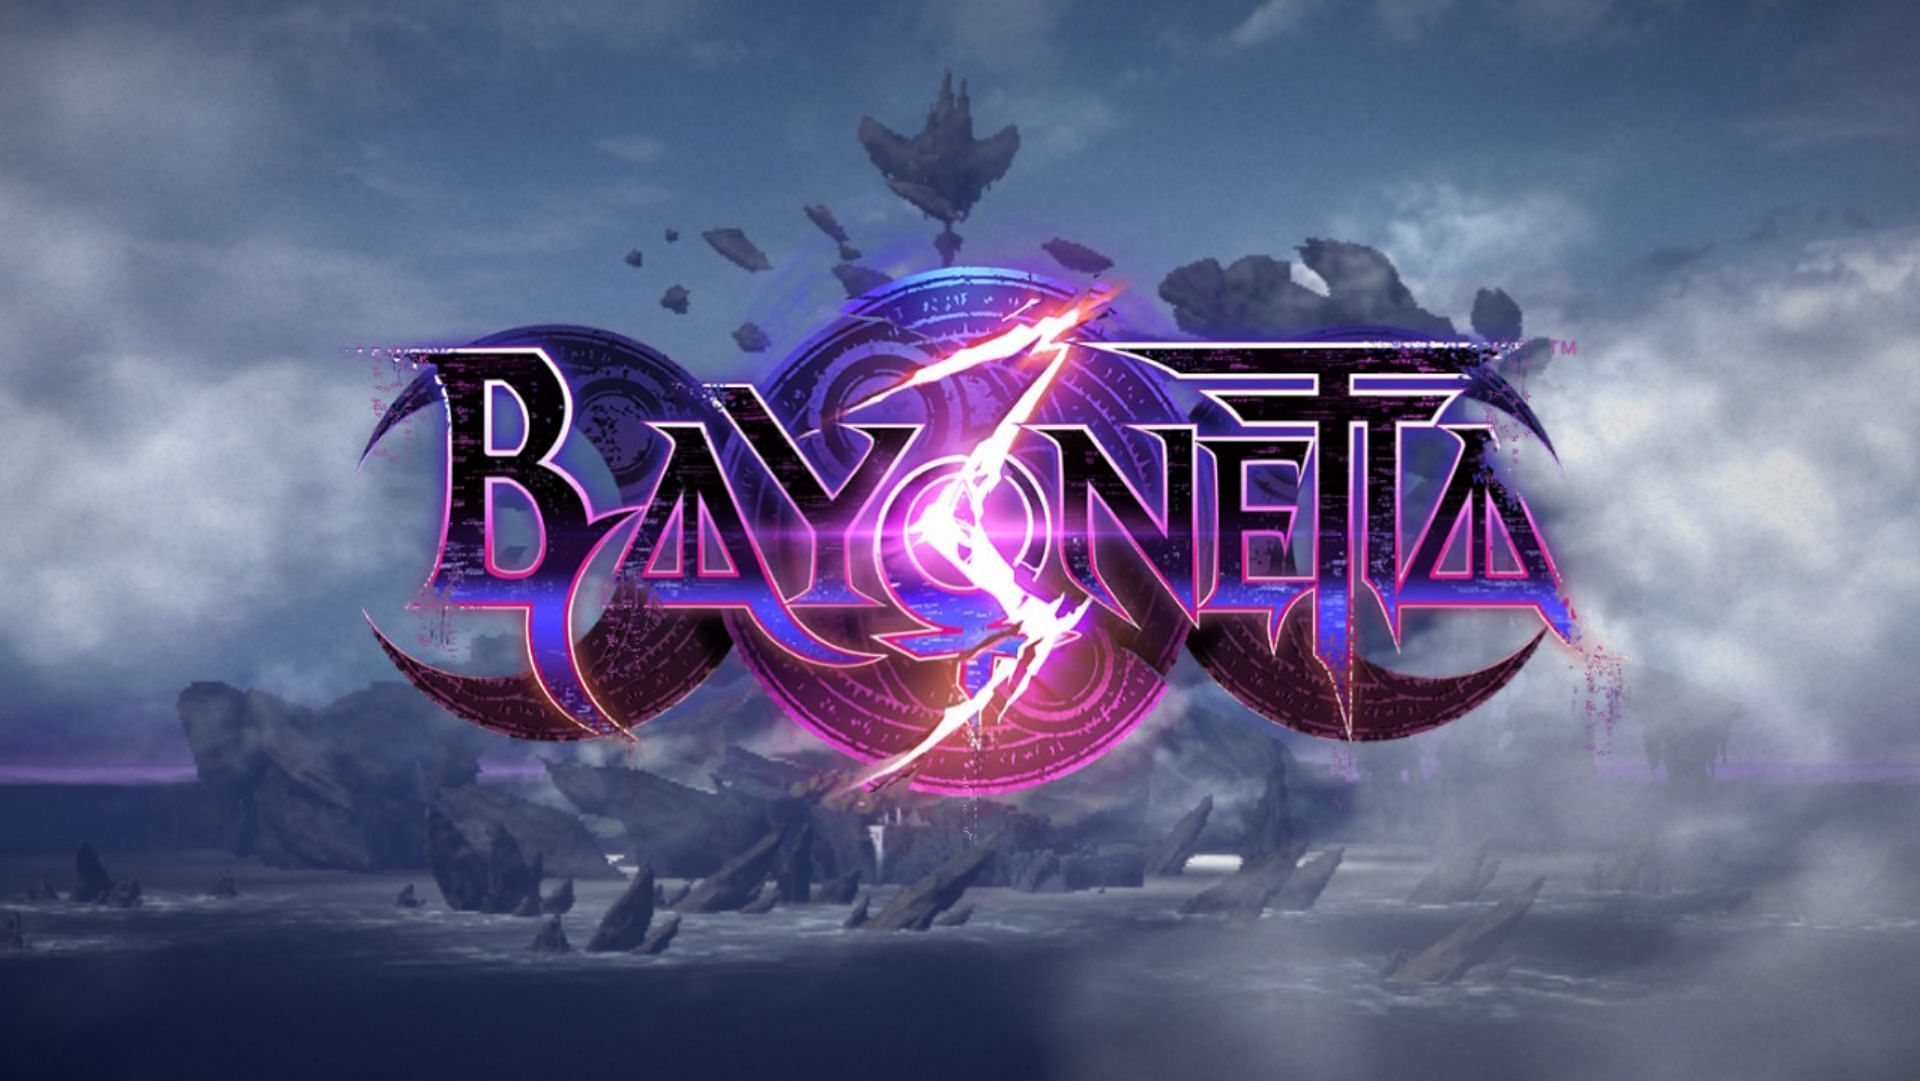 Bayonetta 3 is an excellent addition to Nintendo Switch